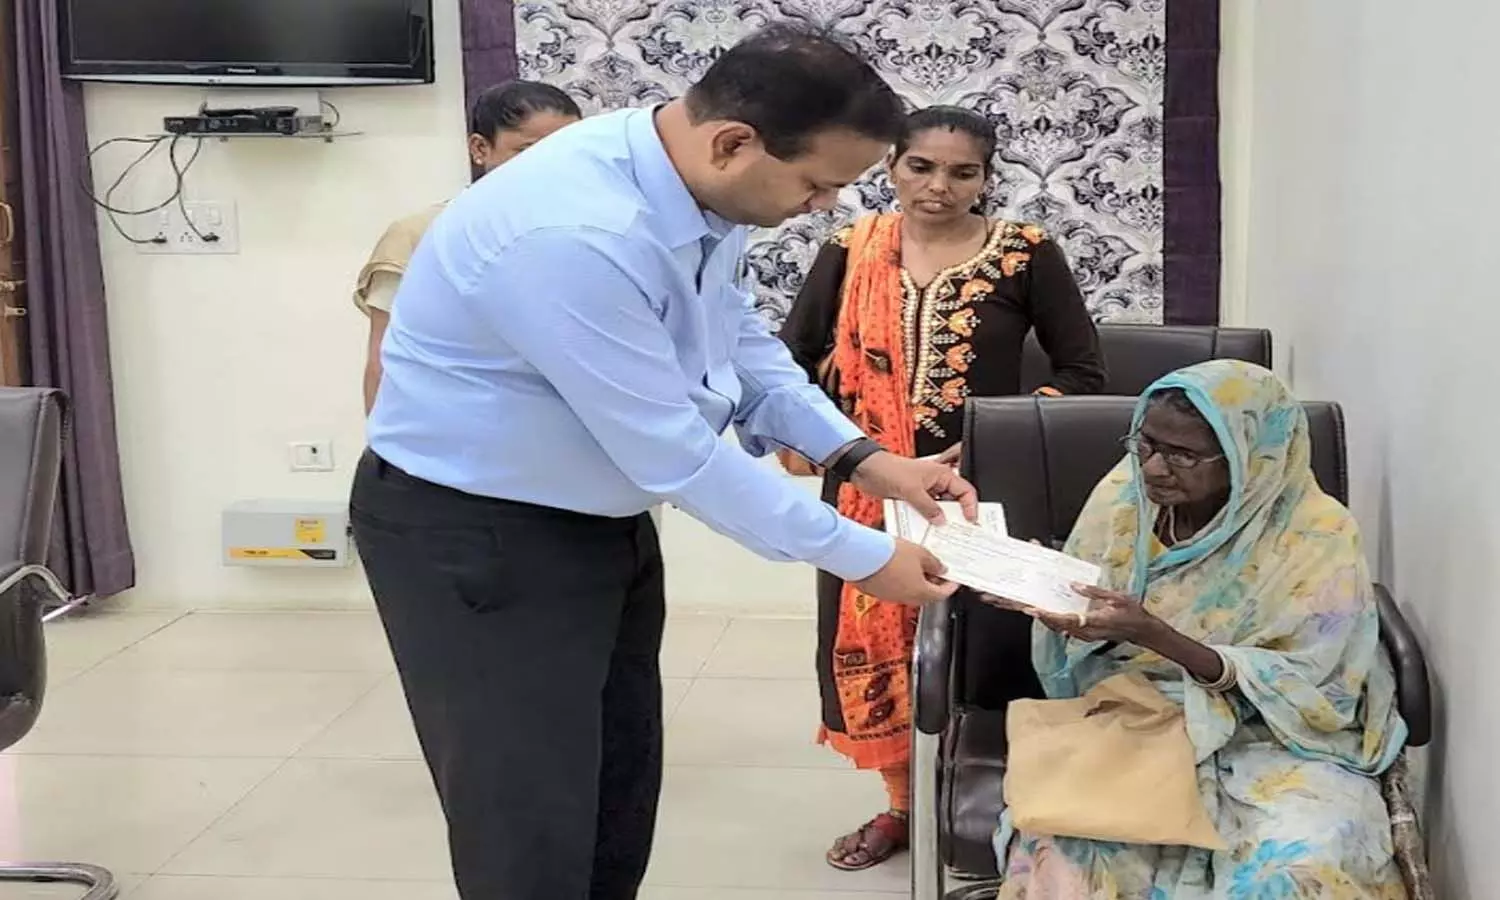 Jhansi: DM Ravindra Kumar became an angel for the old lady who came to the public darshan